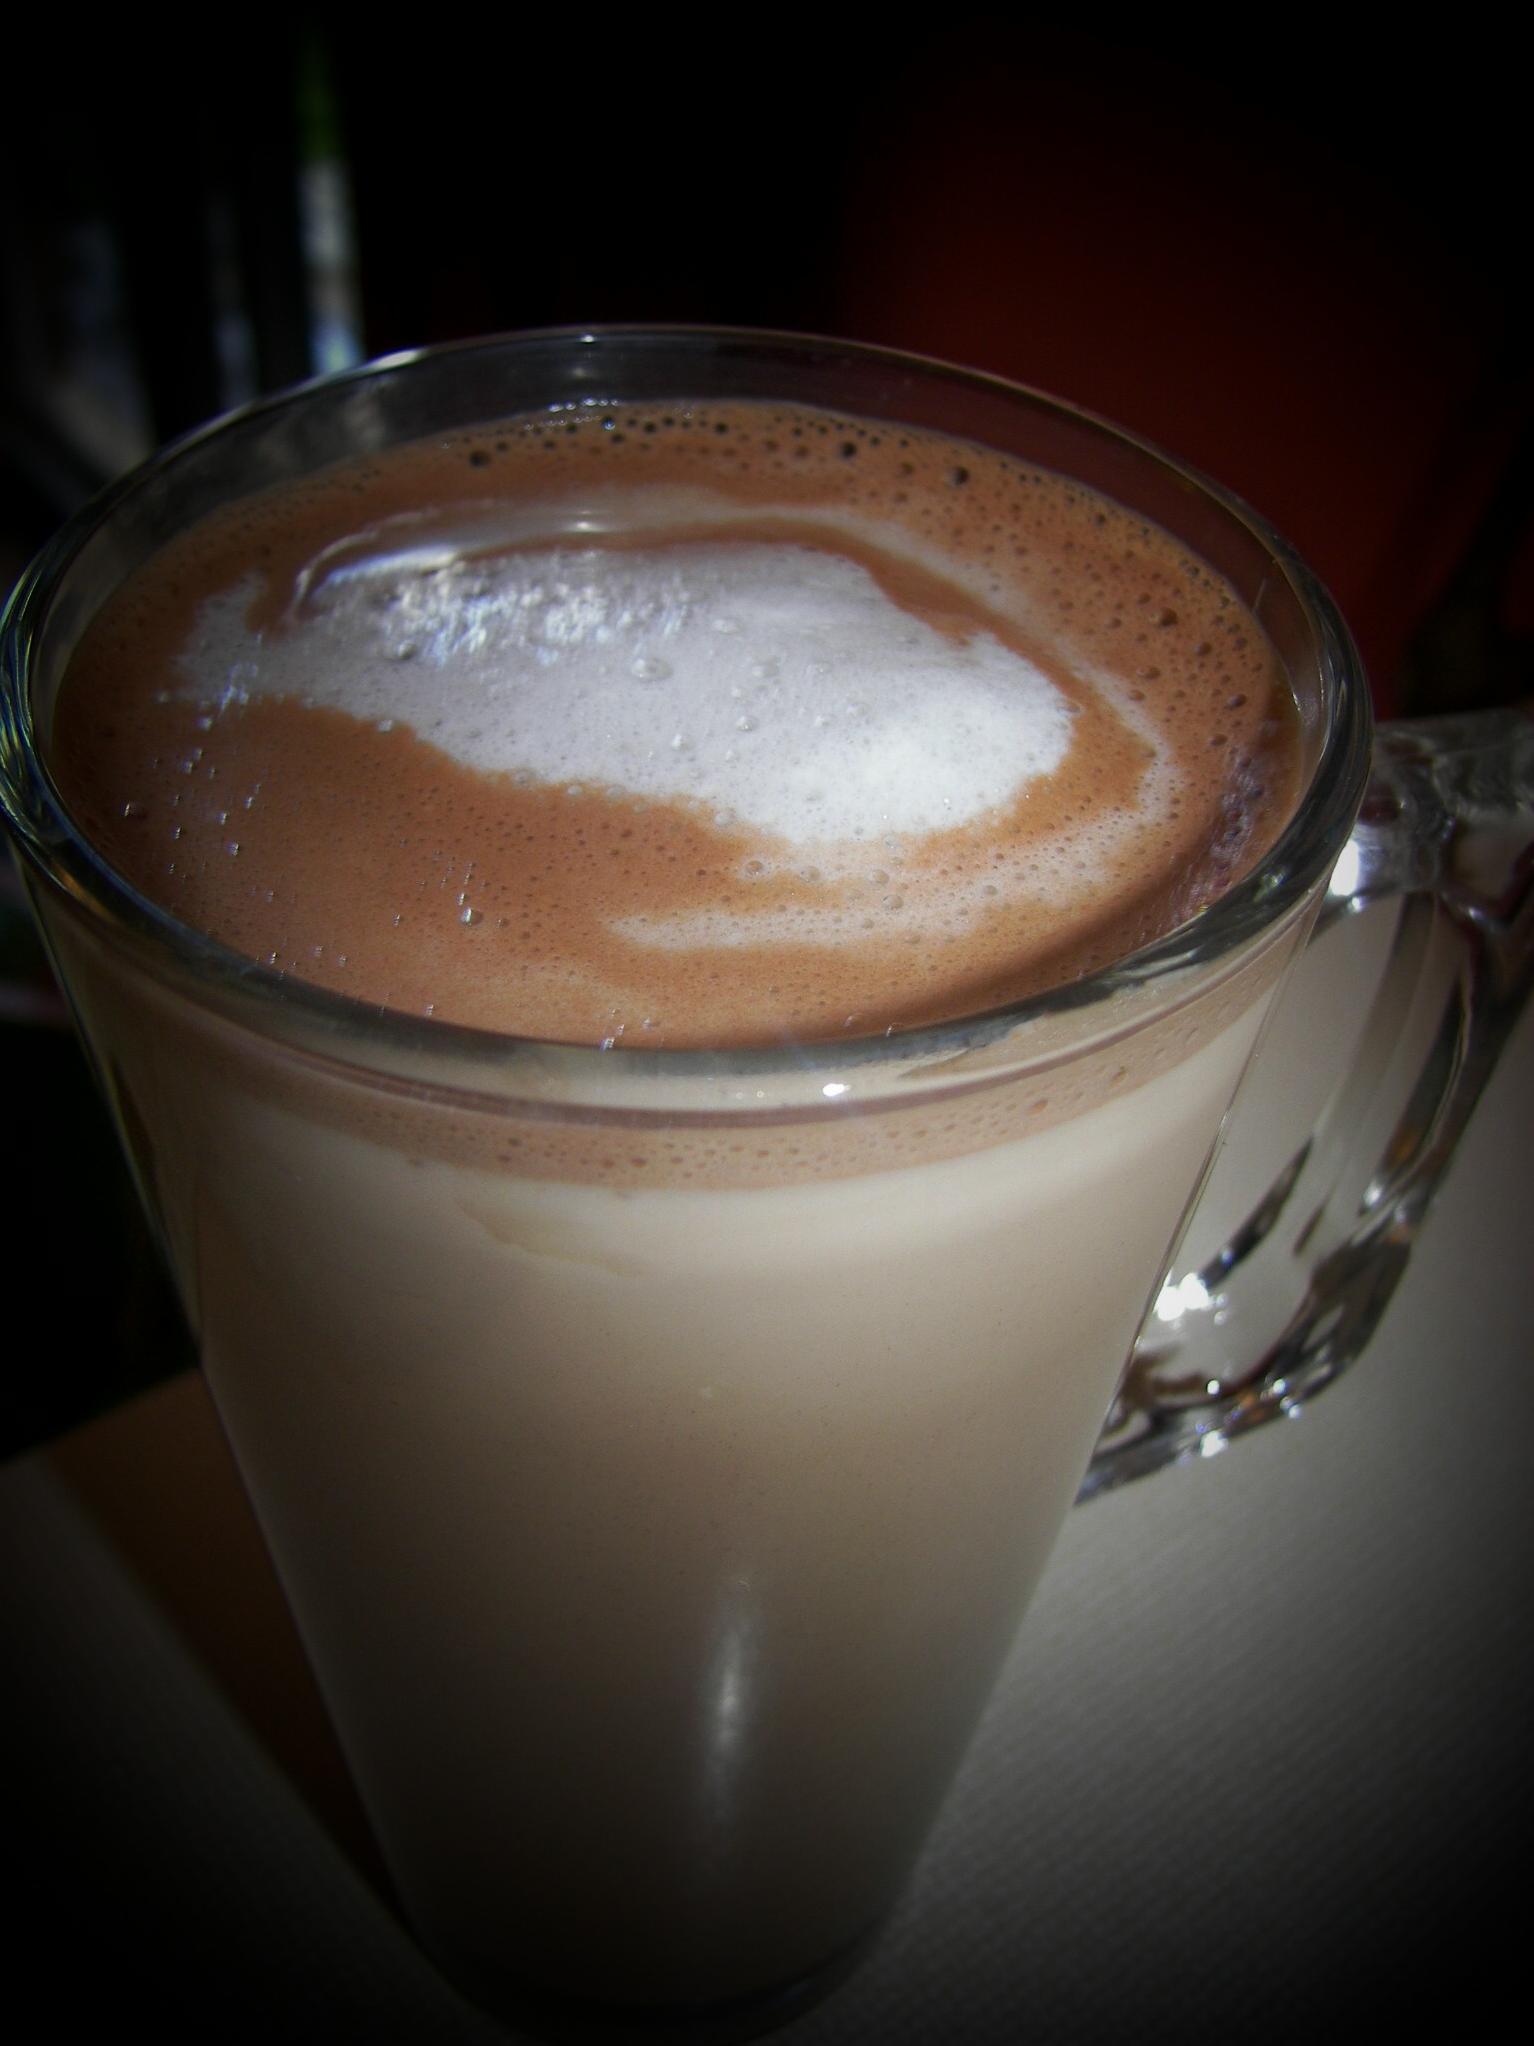  Get cozy with our Mocha Hot Chocolate, so good you can't just have one cup.